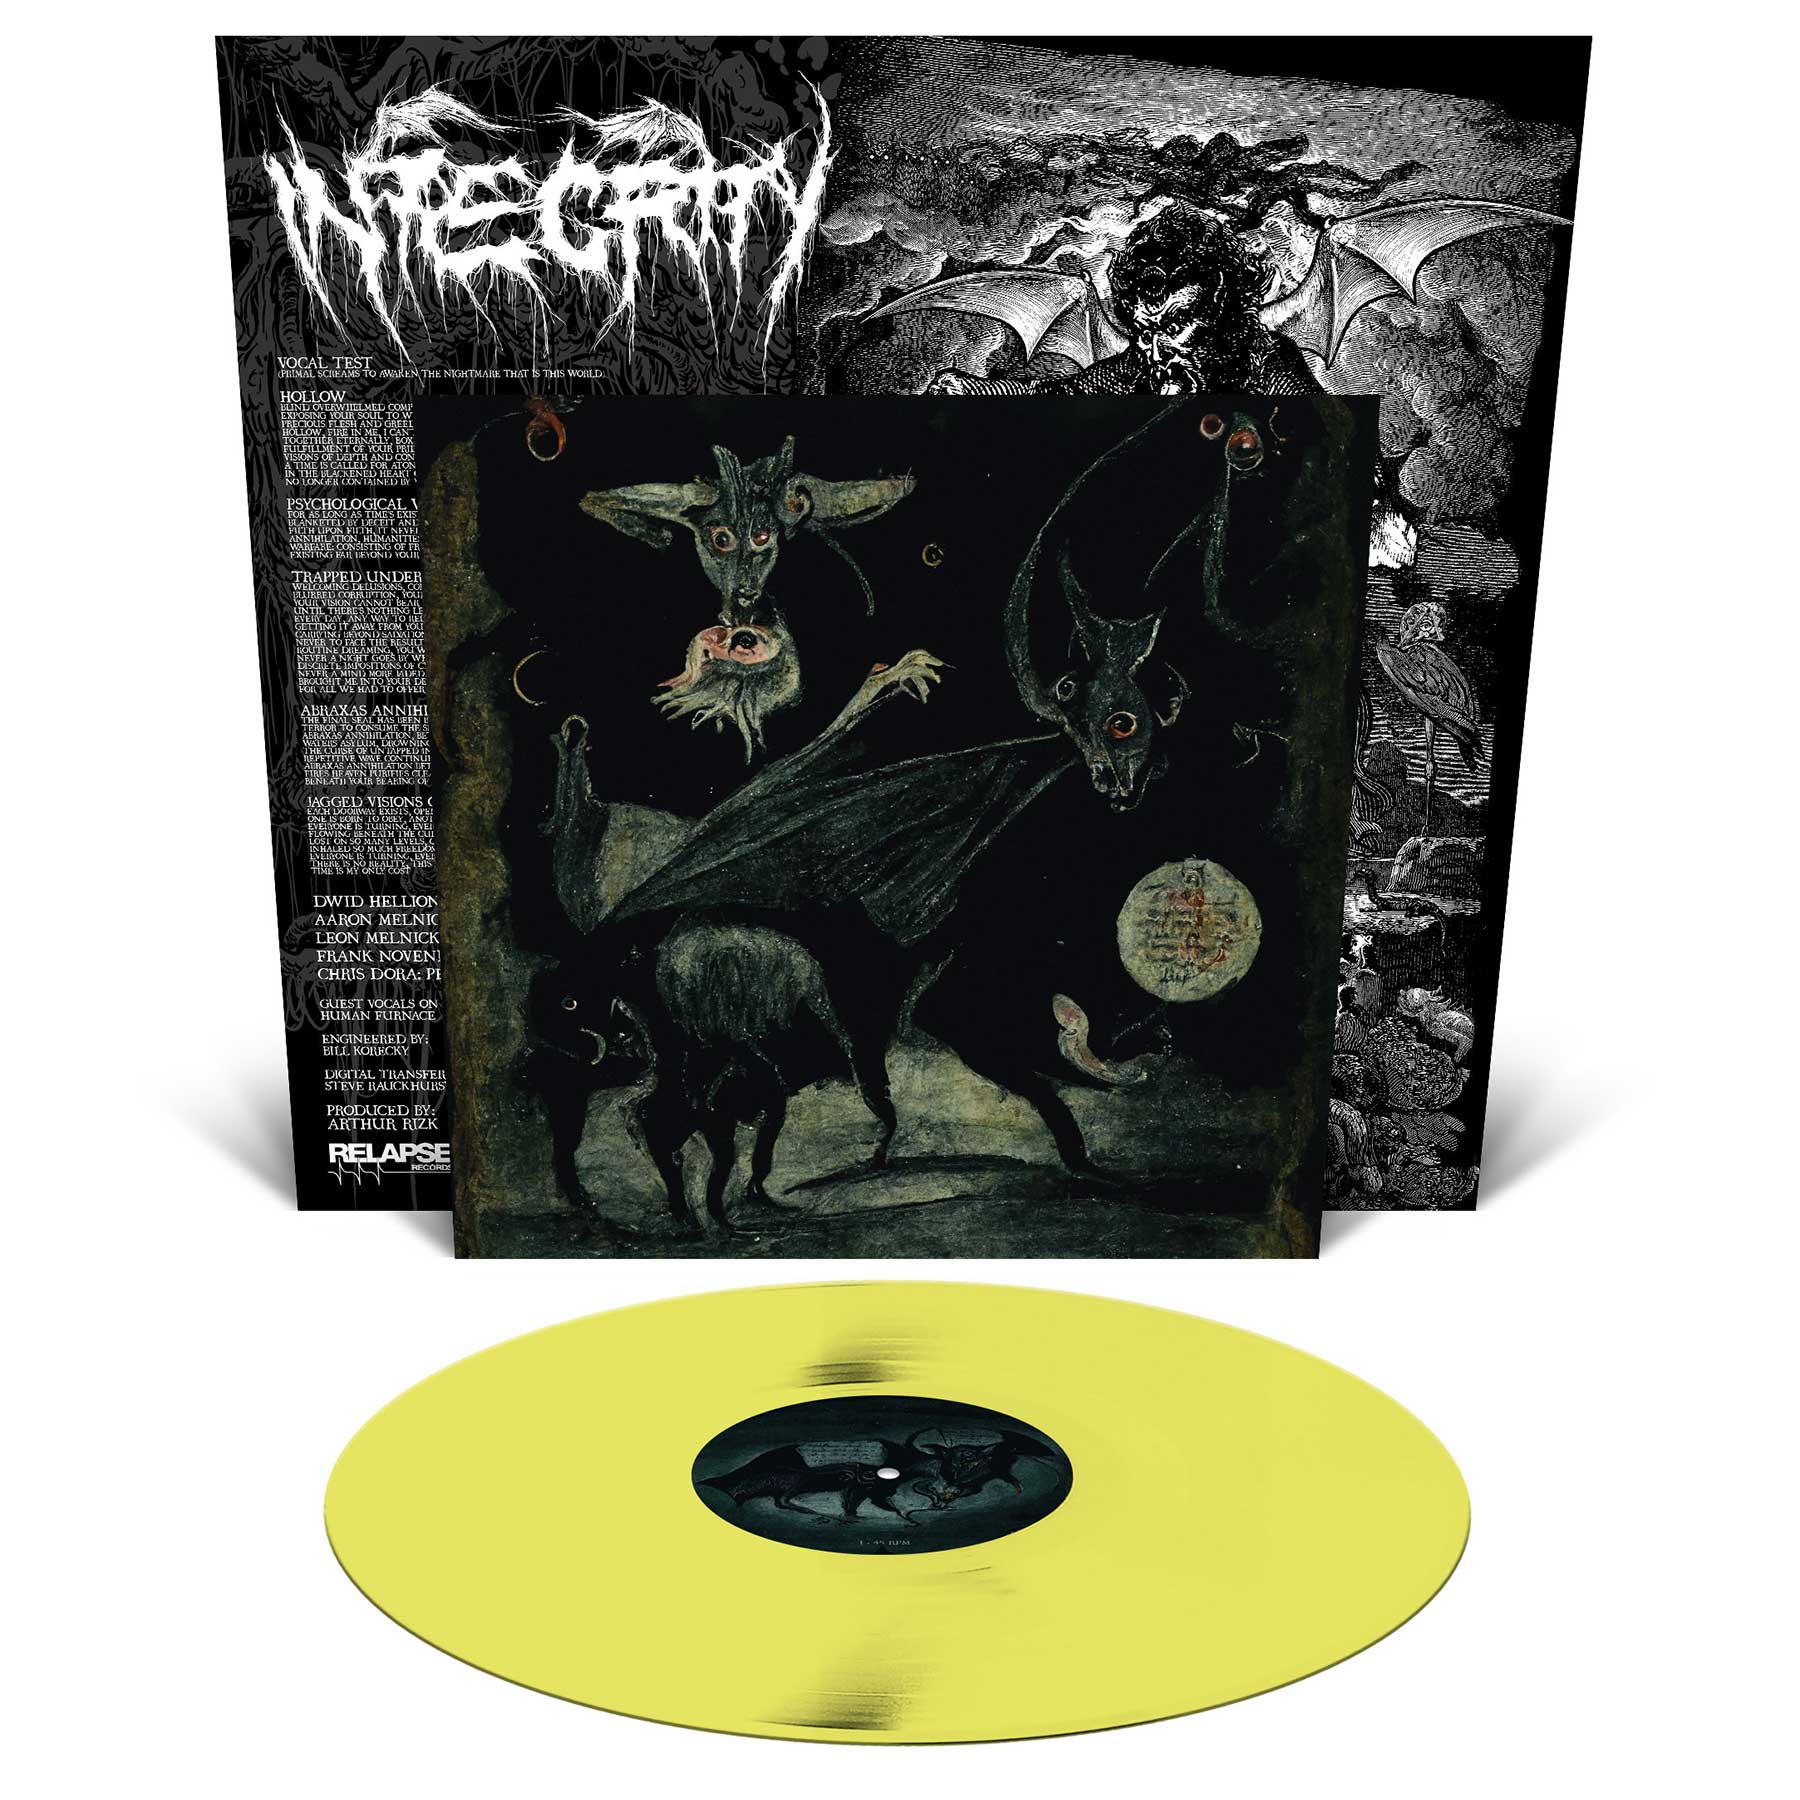 INTEGRITY "HUMANITY IS THE DEVIL" LP PREORDER